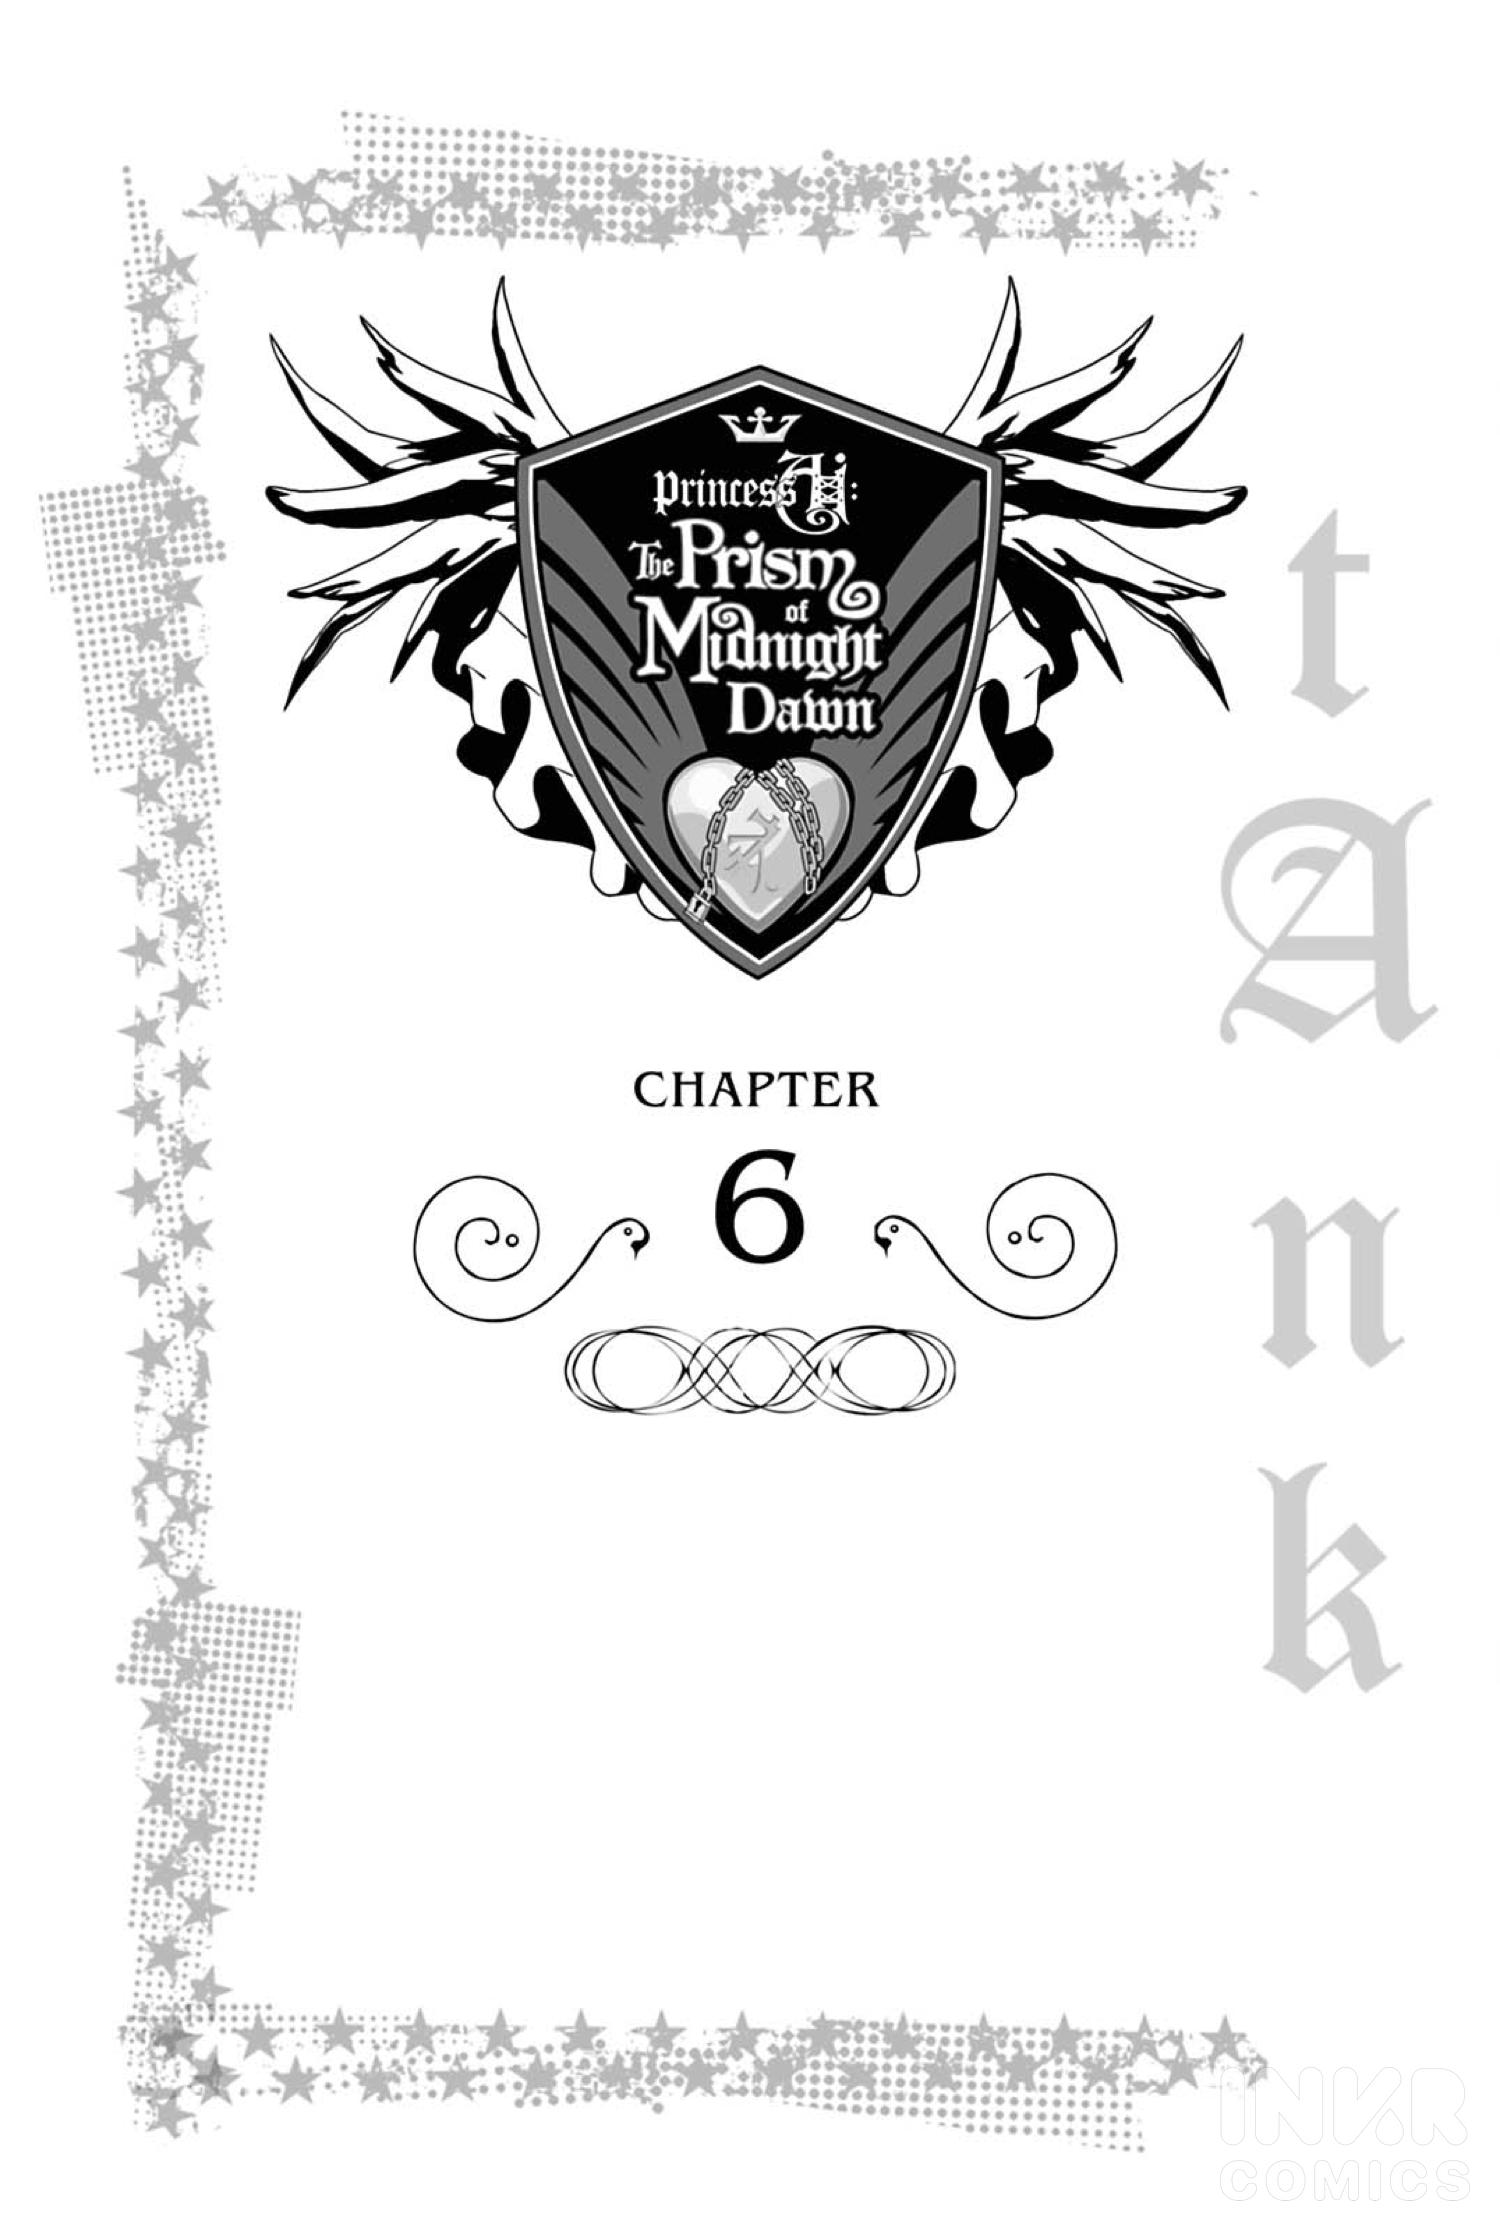 Princess Ai: The Prism Of Midnight Dawn Chapter 1: Vol.1 Chapter 6 - Picture 1